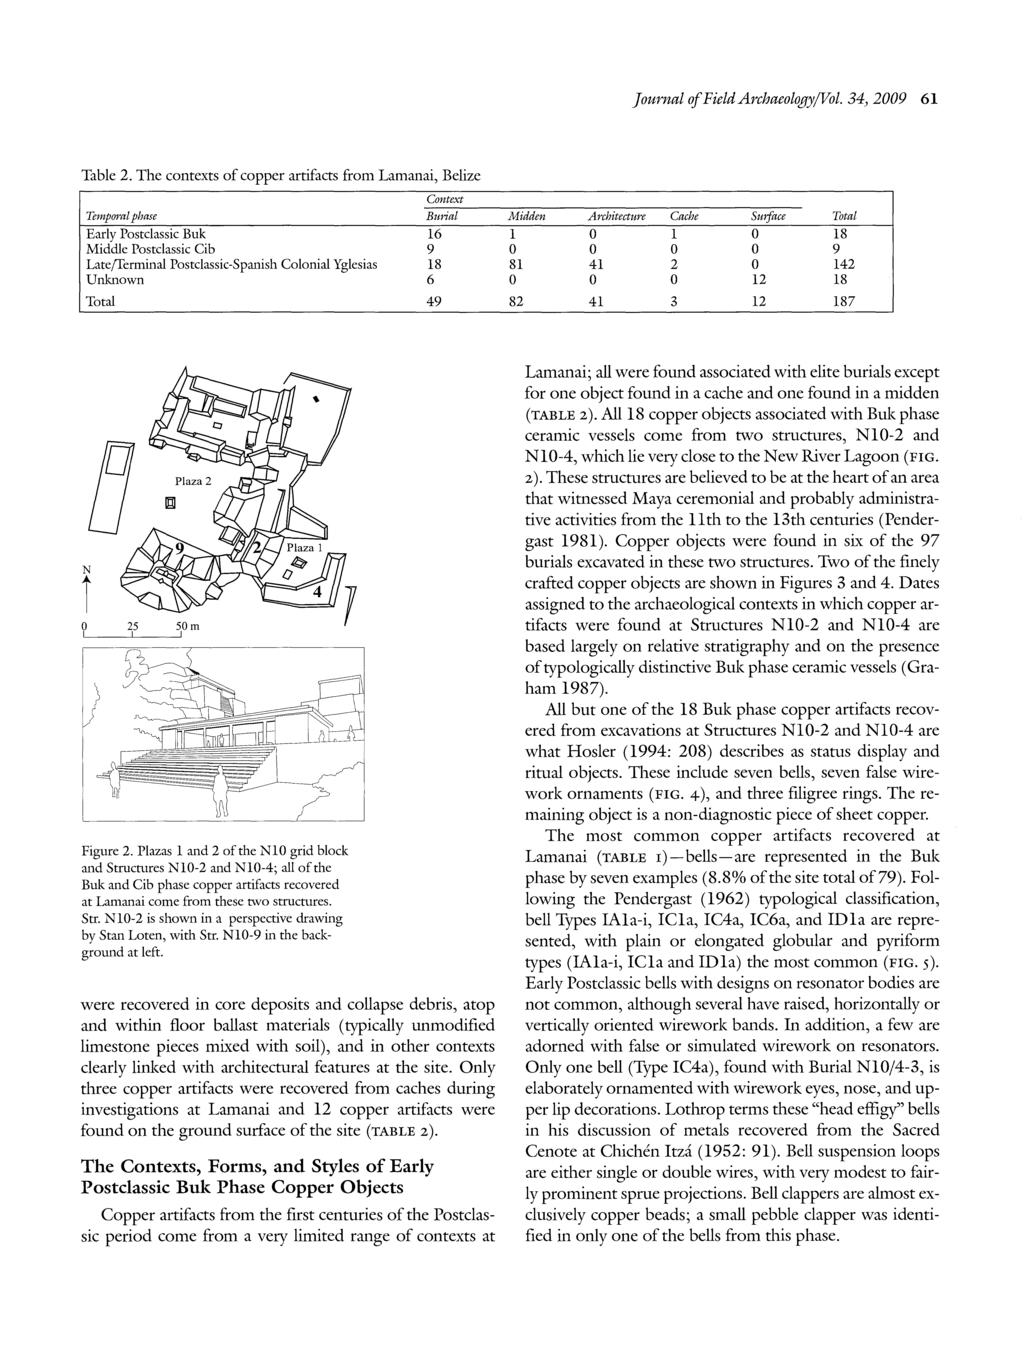 Journal offield ArchaeologyjVol. 34) 2009 61 Table 2.